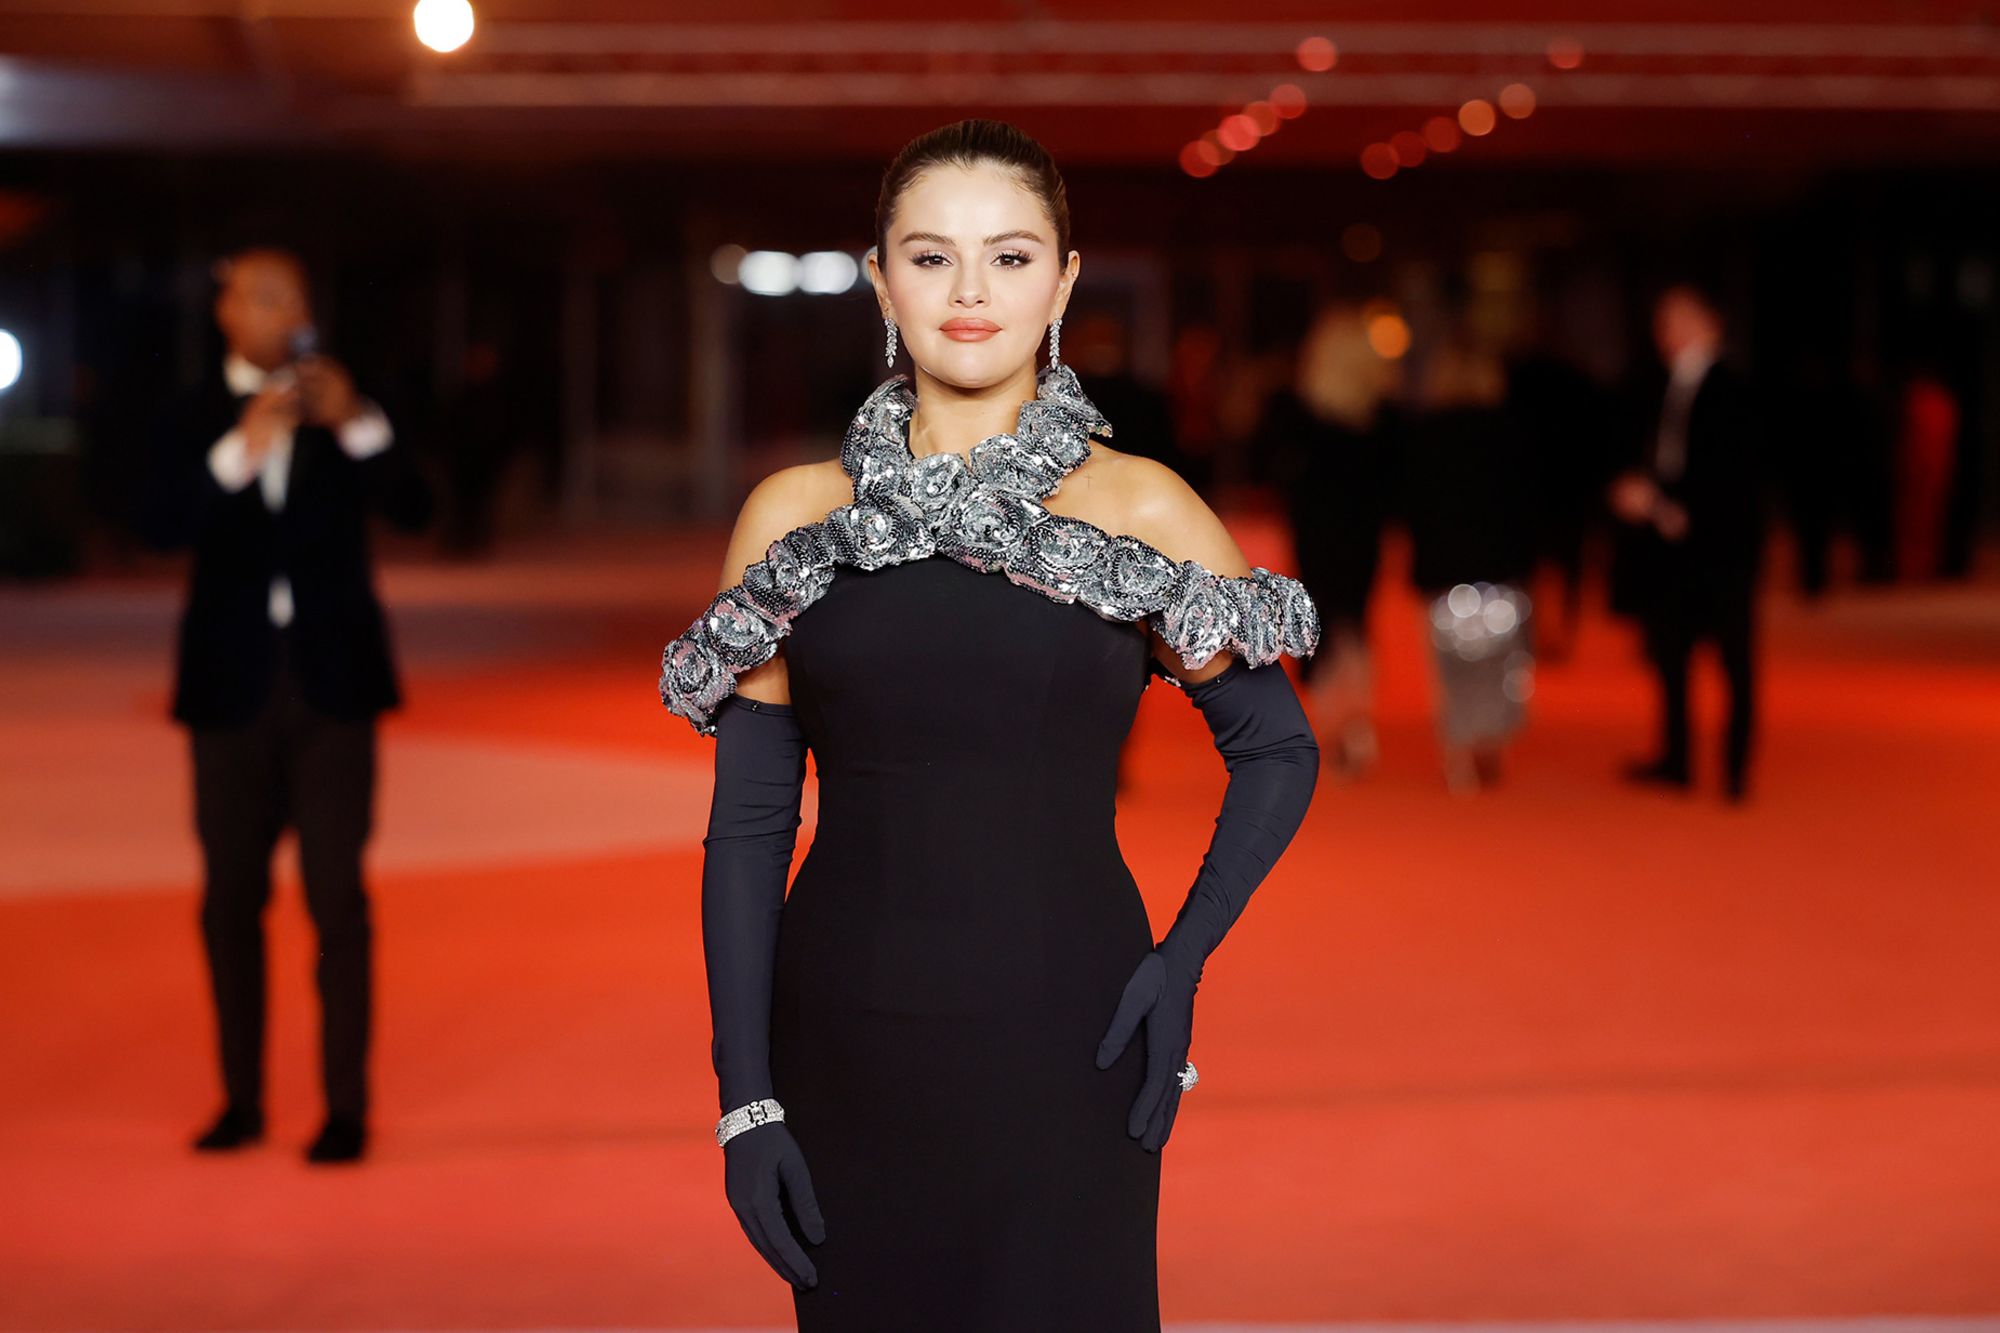 Selena Gomez at the Academy Museum of Motion Pictures Gala in Los Angeles, California. Gomez was one of a number of celebrities in evening gloves.